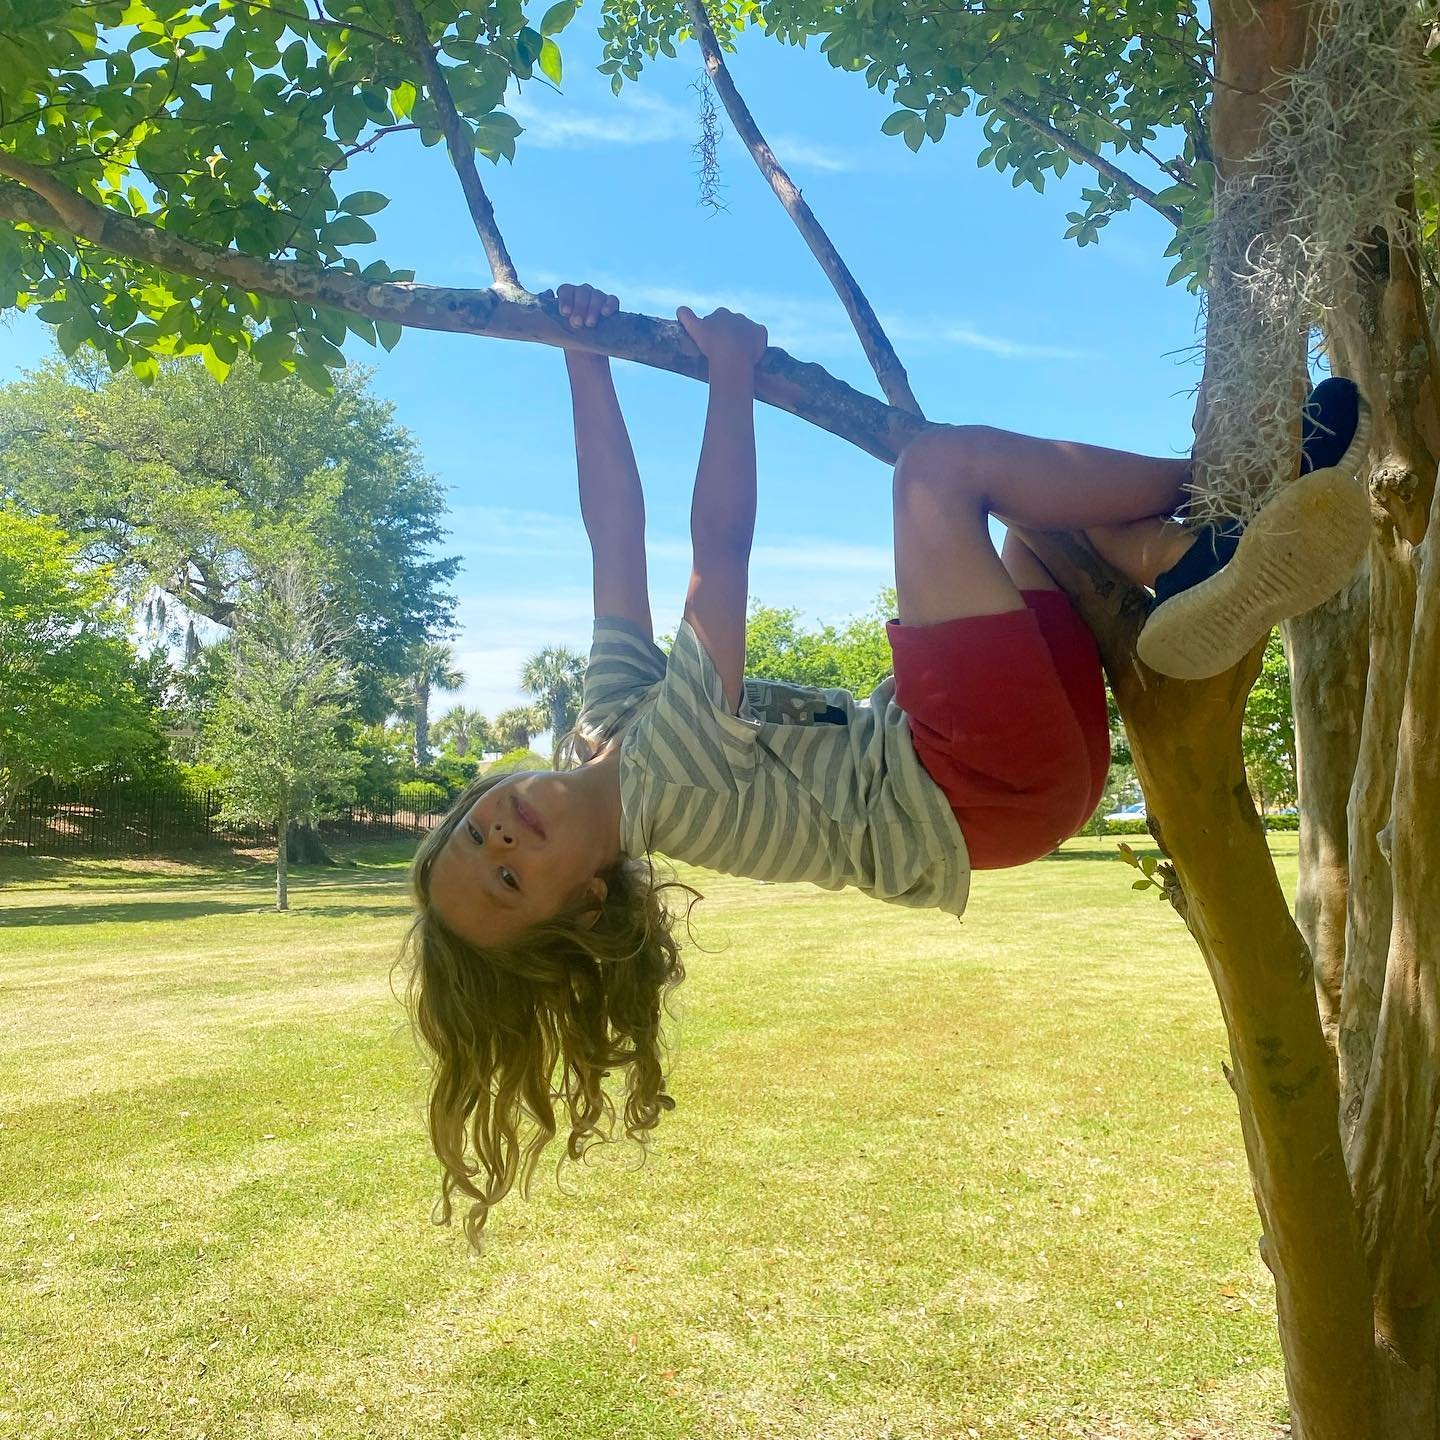 Found a sloth in the park today 🦥☺️🌳 along with a 300 year old tree. Love this kid and these bright sunny days.